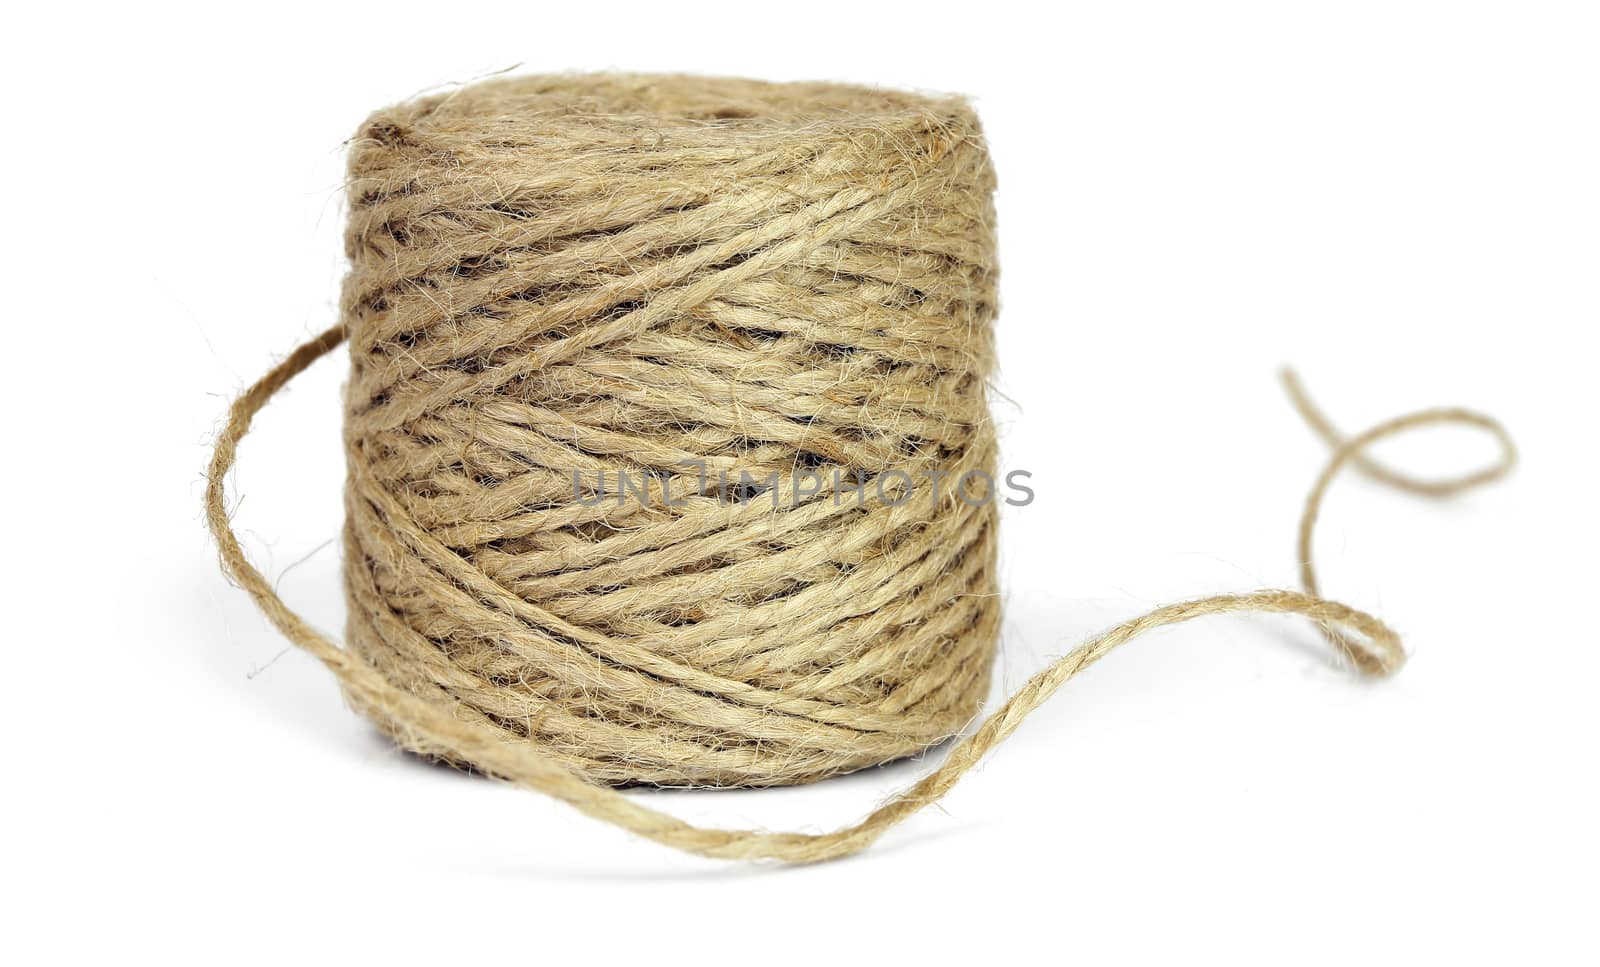 Skein of jute twine by leventina